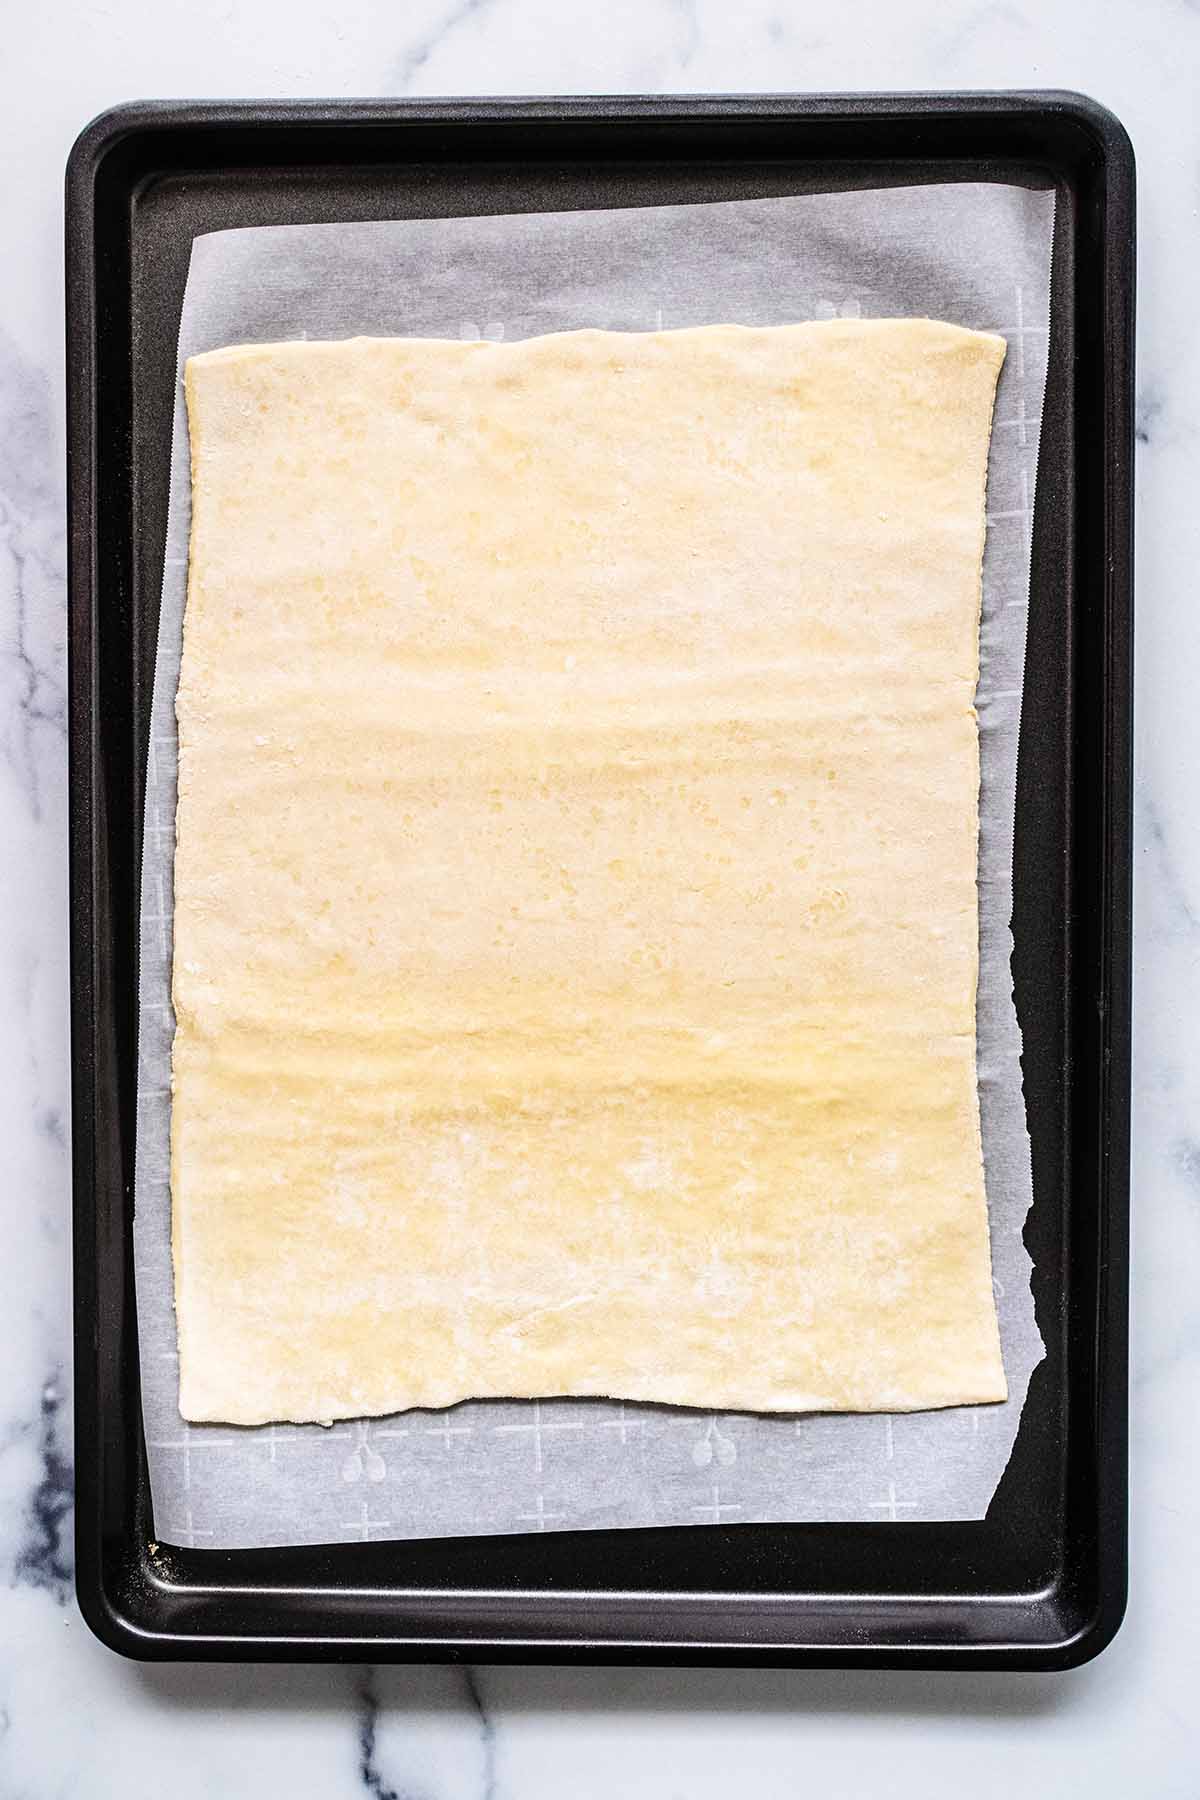 Puff pastry sheet on parchment paper in a baking sheet.